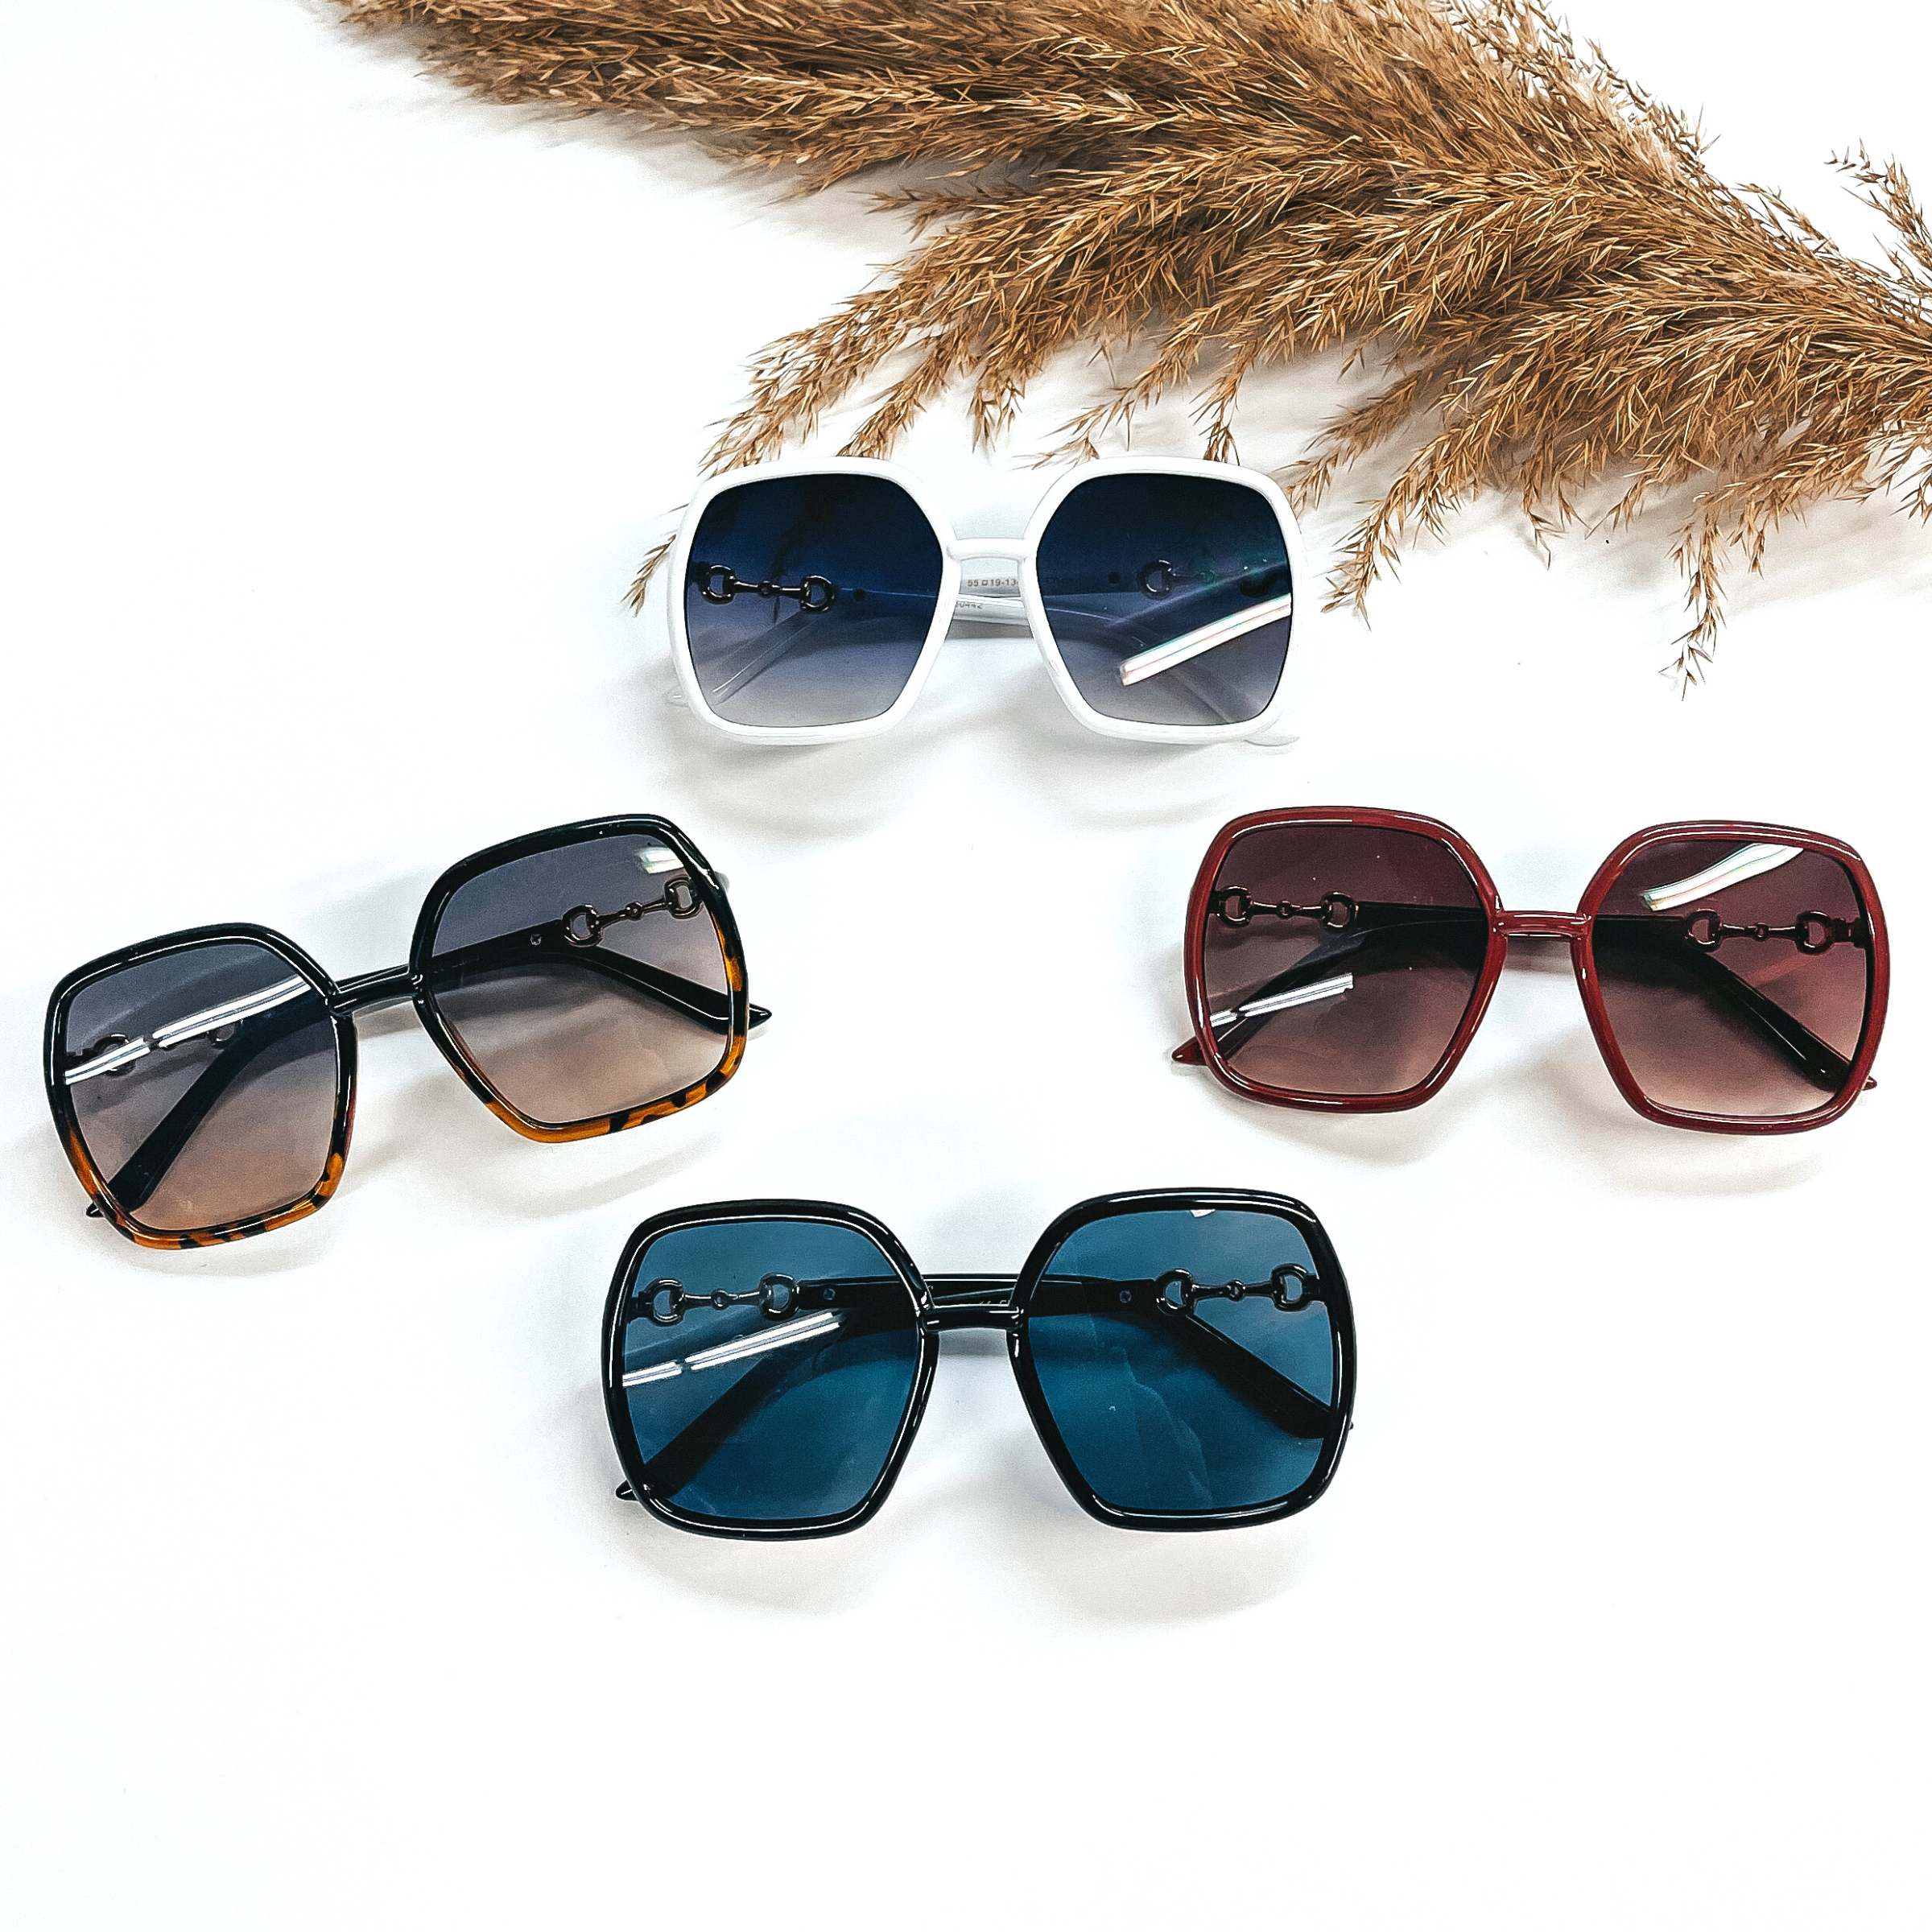 These are four pairs of big square sunglasses in white, tortouise, maroon, and black. They are laying on white background with a brown plant on the top as decor.